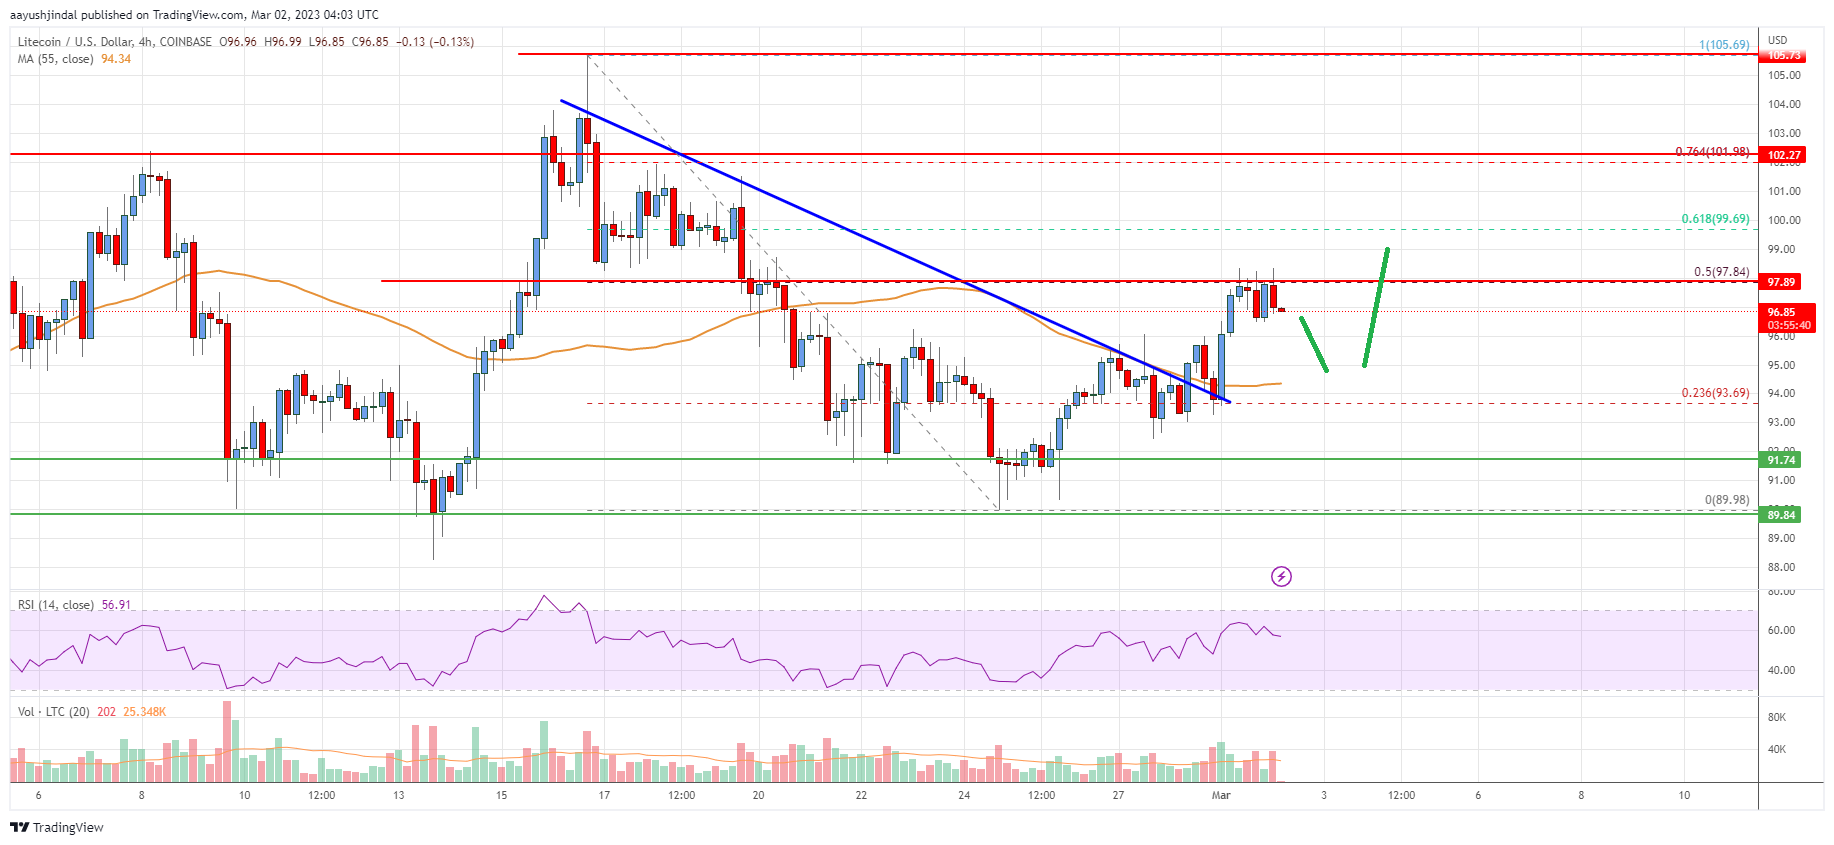 Litecoin (LTC) Price Analysis: More Gains Possible Above $100